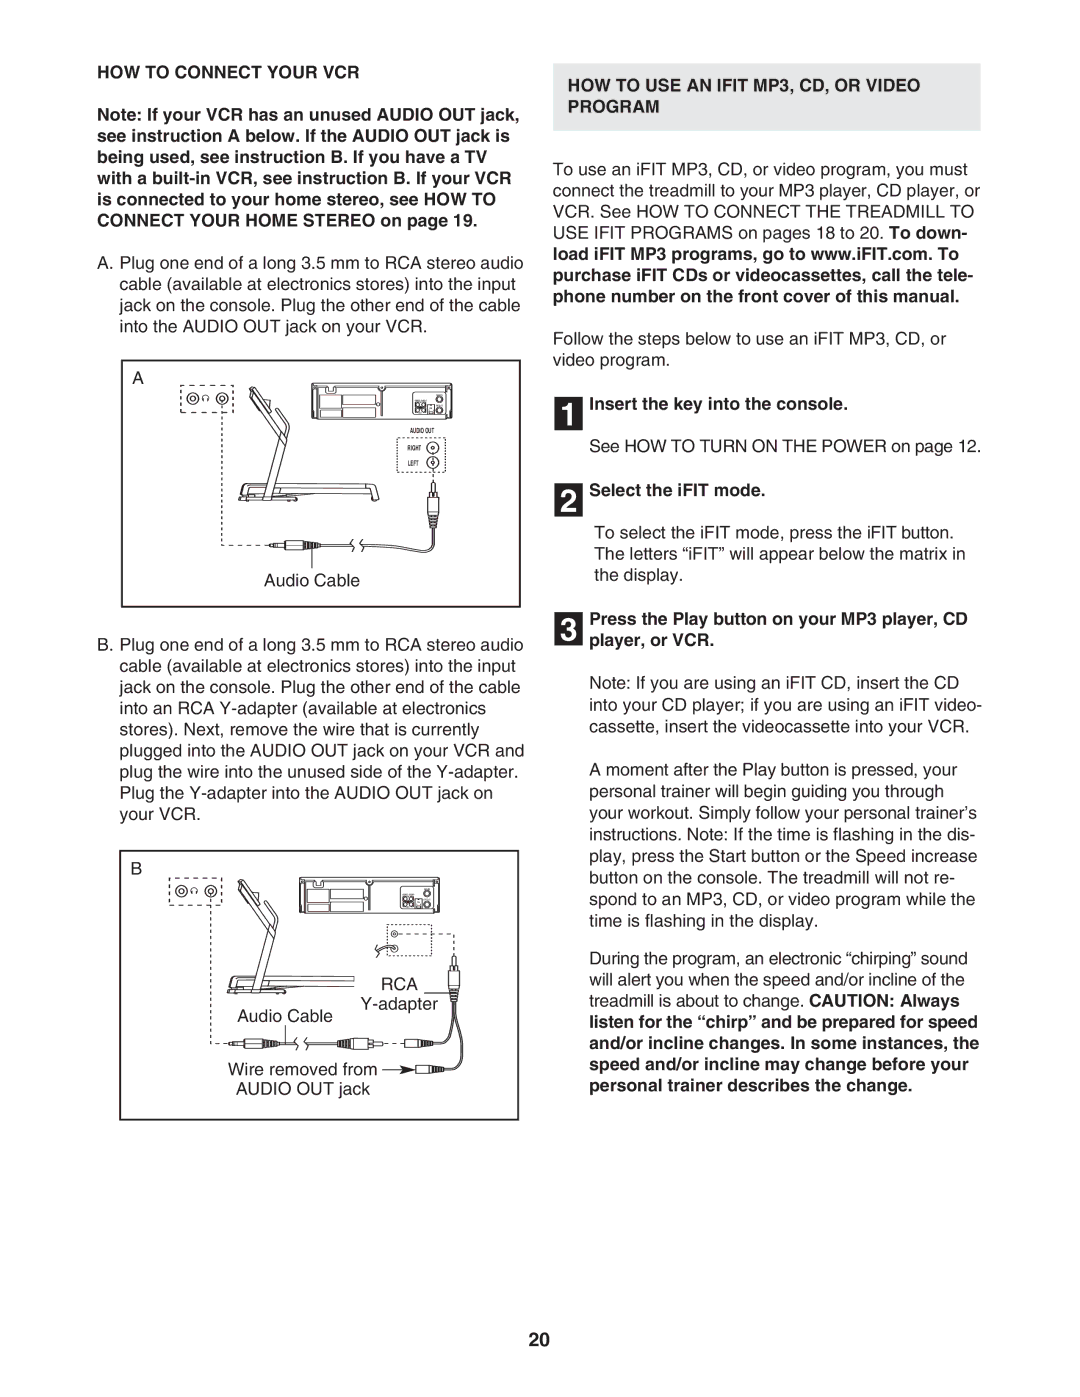 ProForm PETL41106.0 user manual HOW to Connect Your VCR, HOW to USE AN Ifit MP3, CD, or Video Program, Select the iFIT mode 